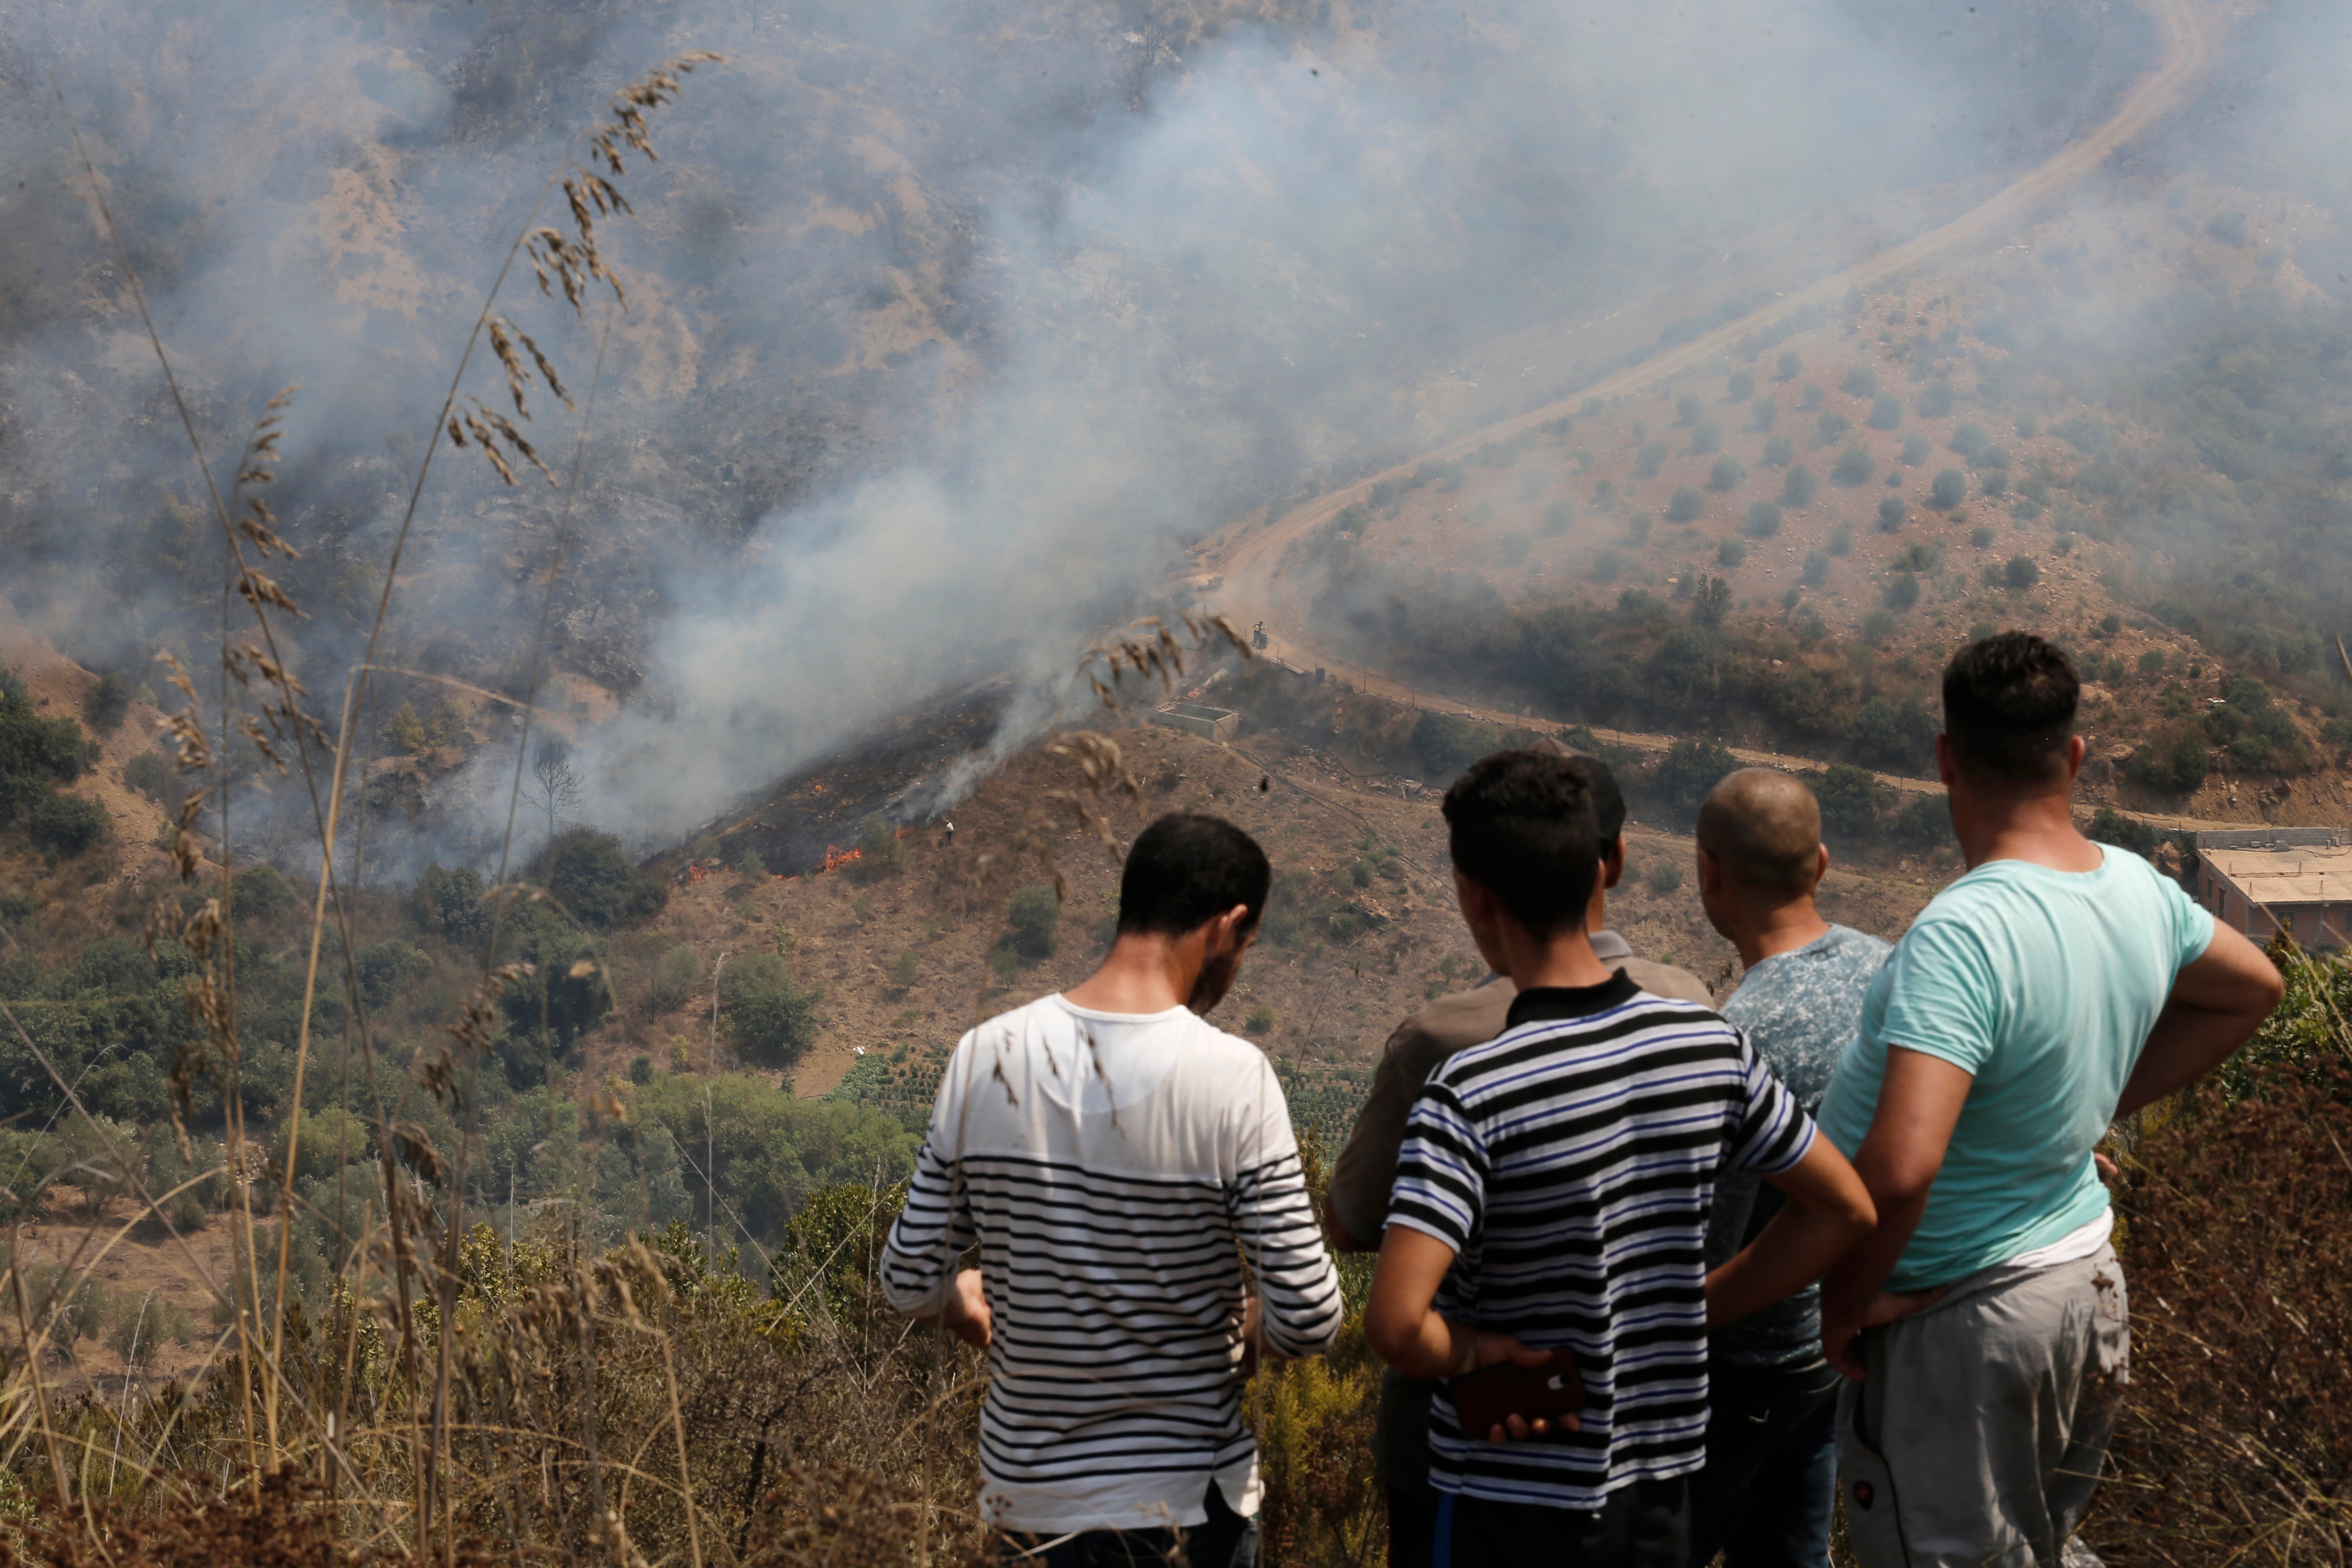 Residents watch a fire near the village of Toudja, in the Kabyle region, East of Algiers